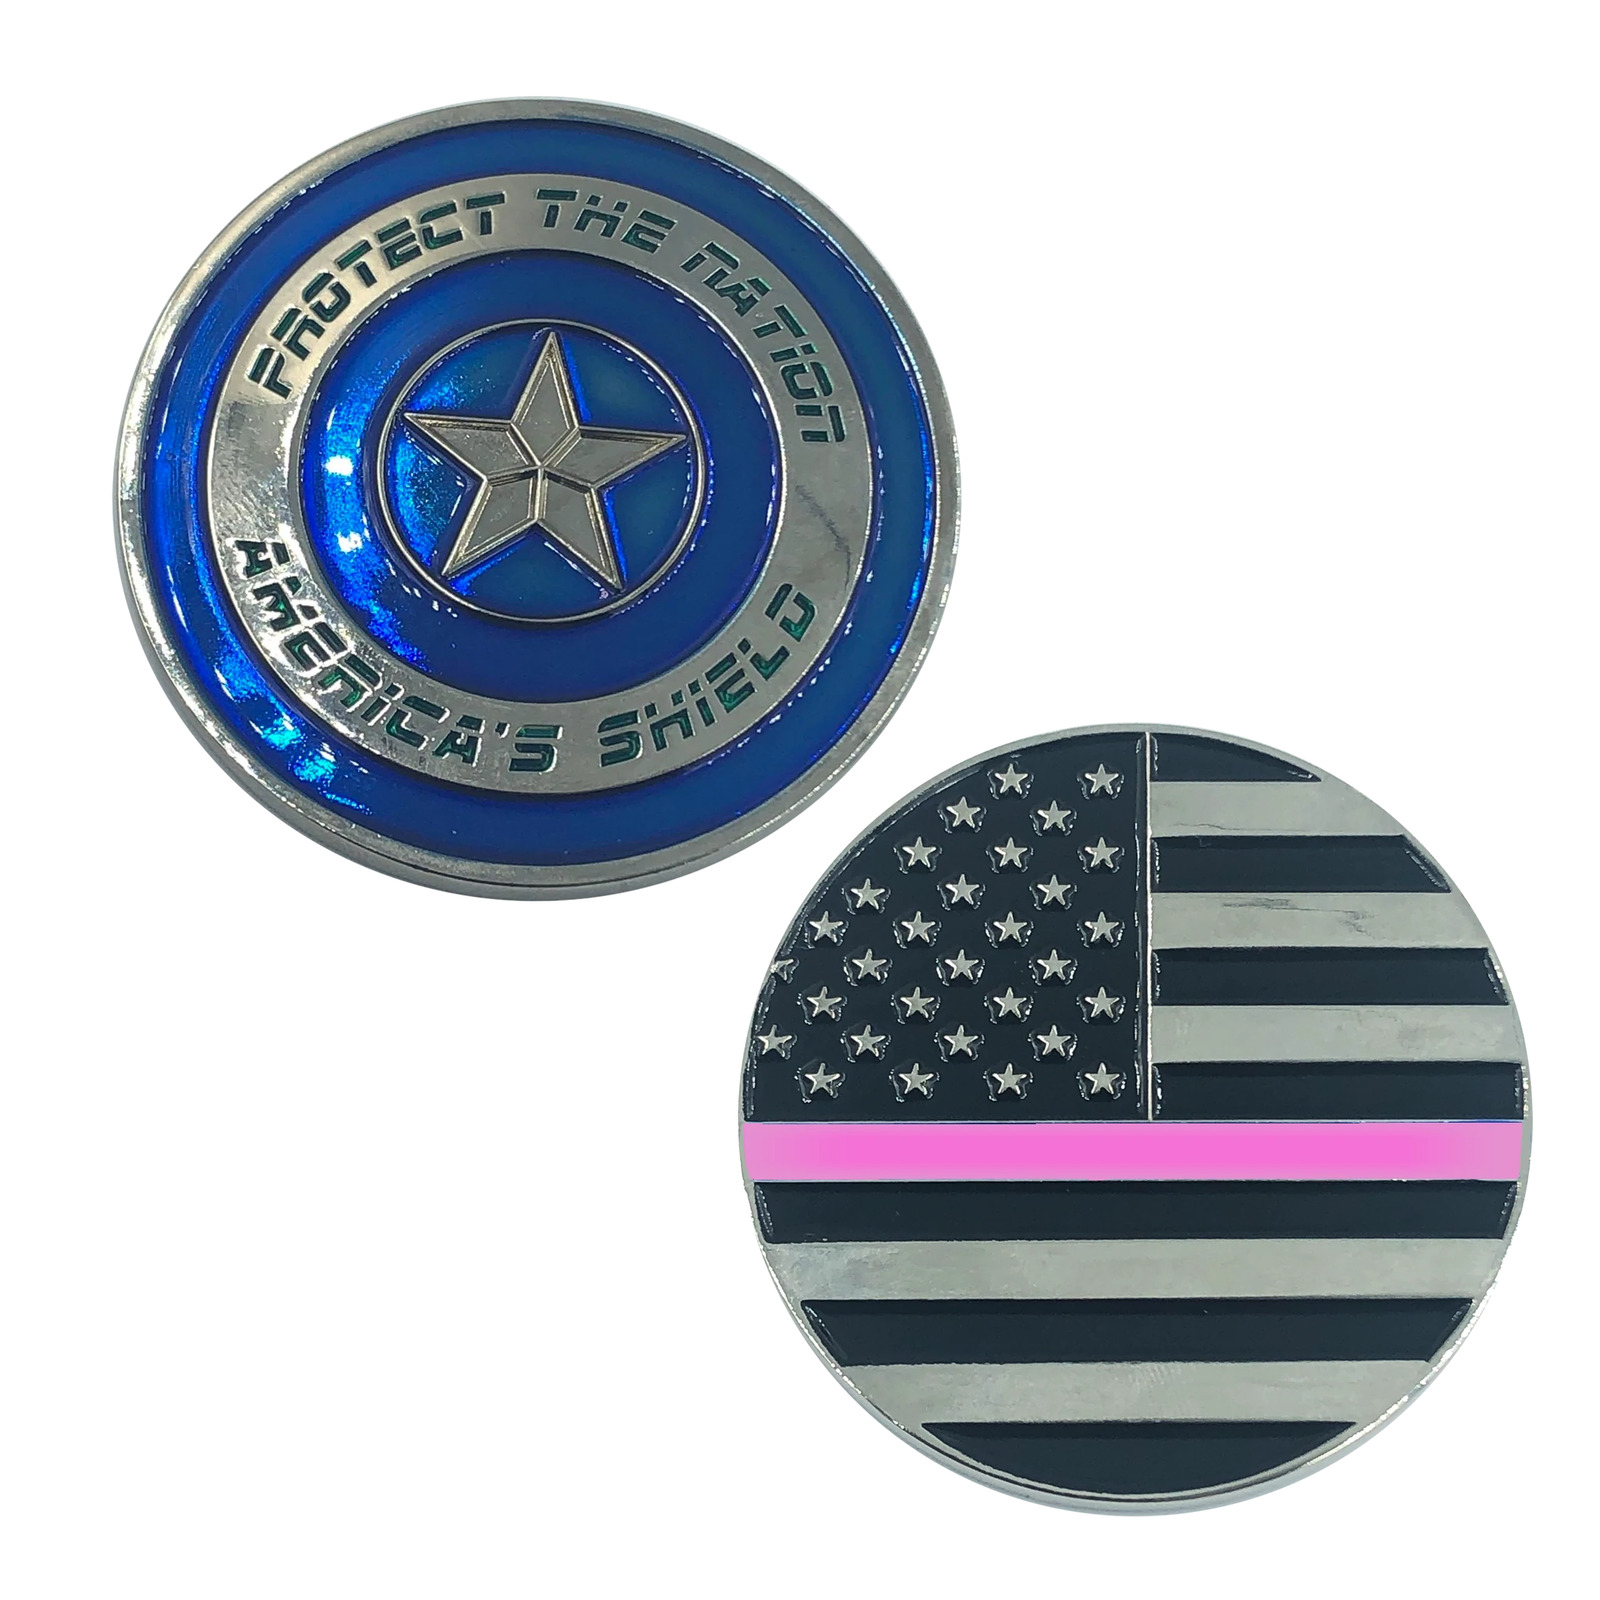 BL6-020 Thin PINK Captain America Shield Police BREAST CANCER AWARENESS CBP NYPD